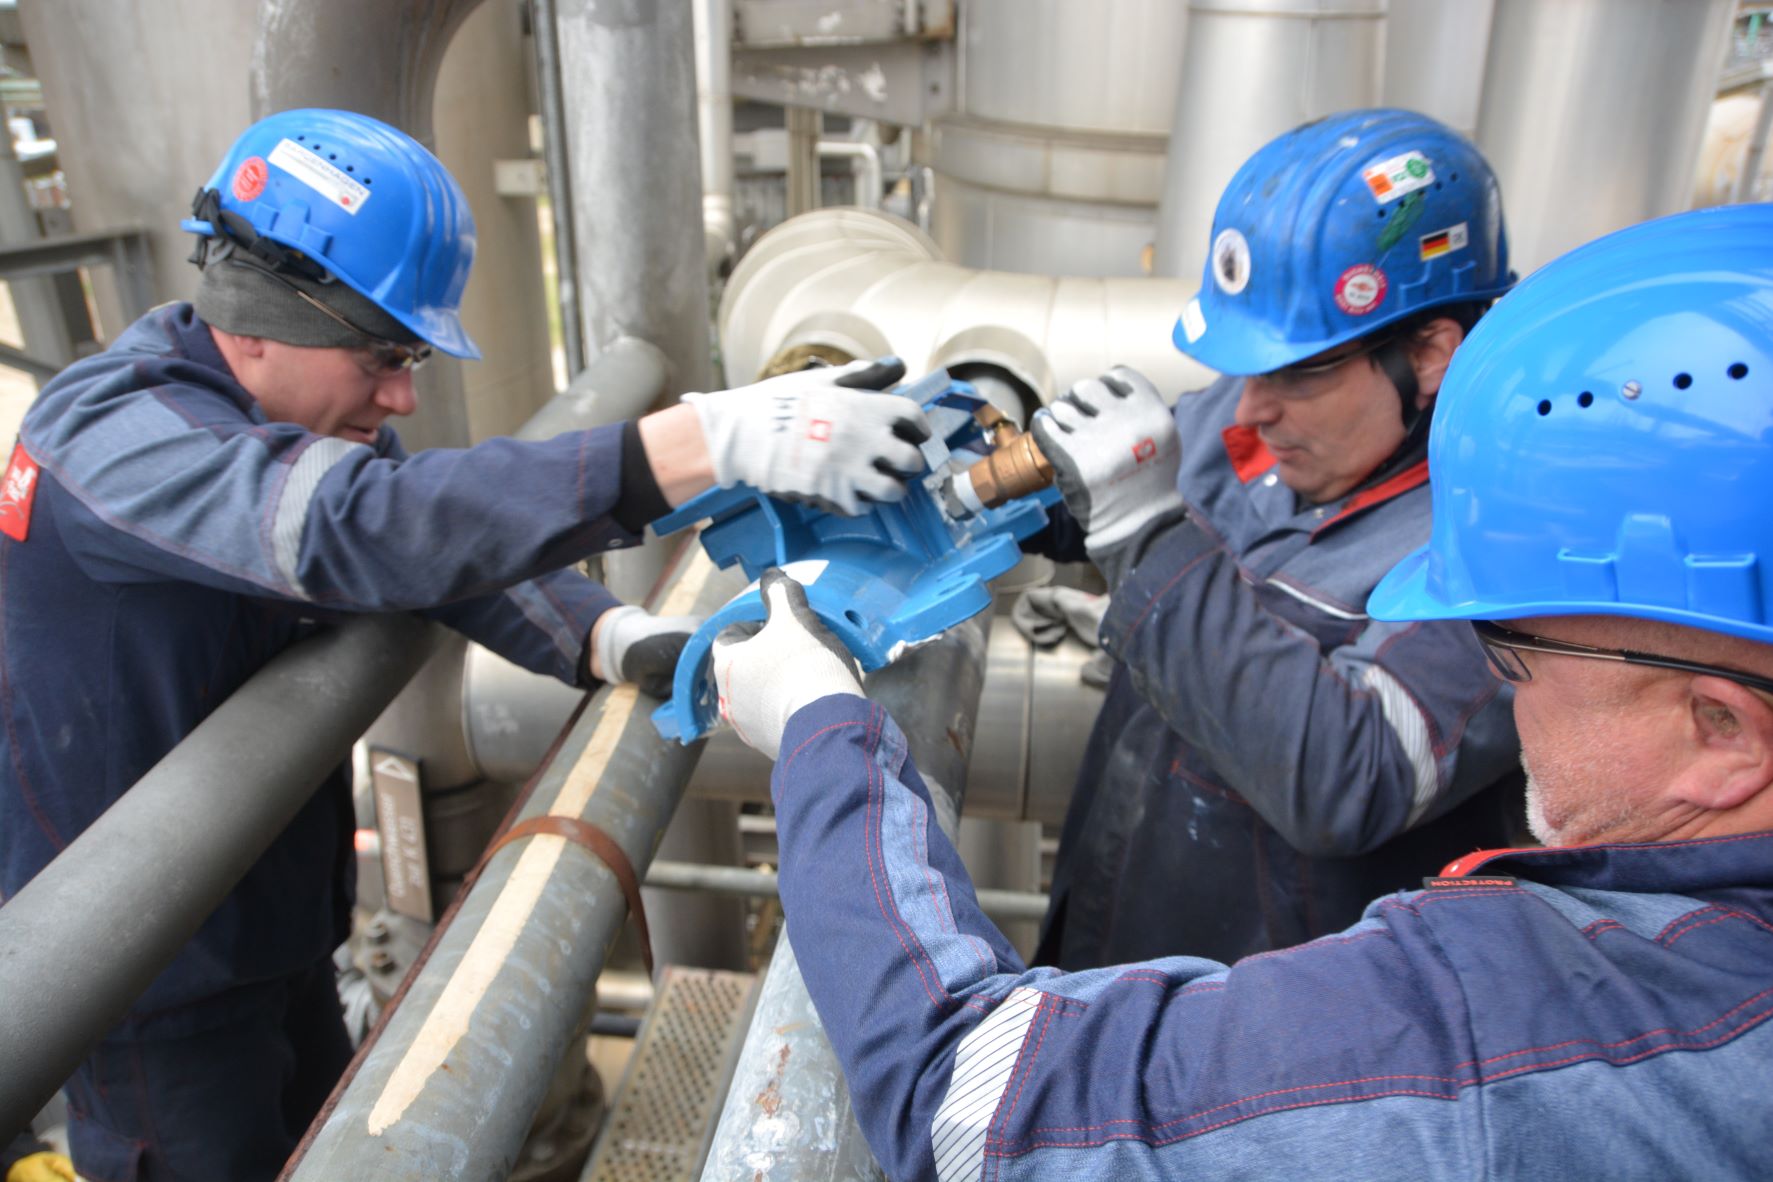 Global Training Program Builds Network of Certified Insertion Valve Installers Around the World